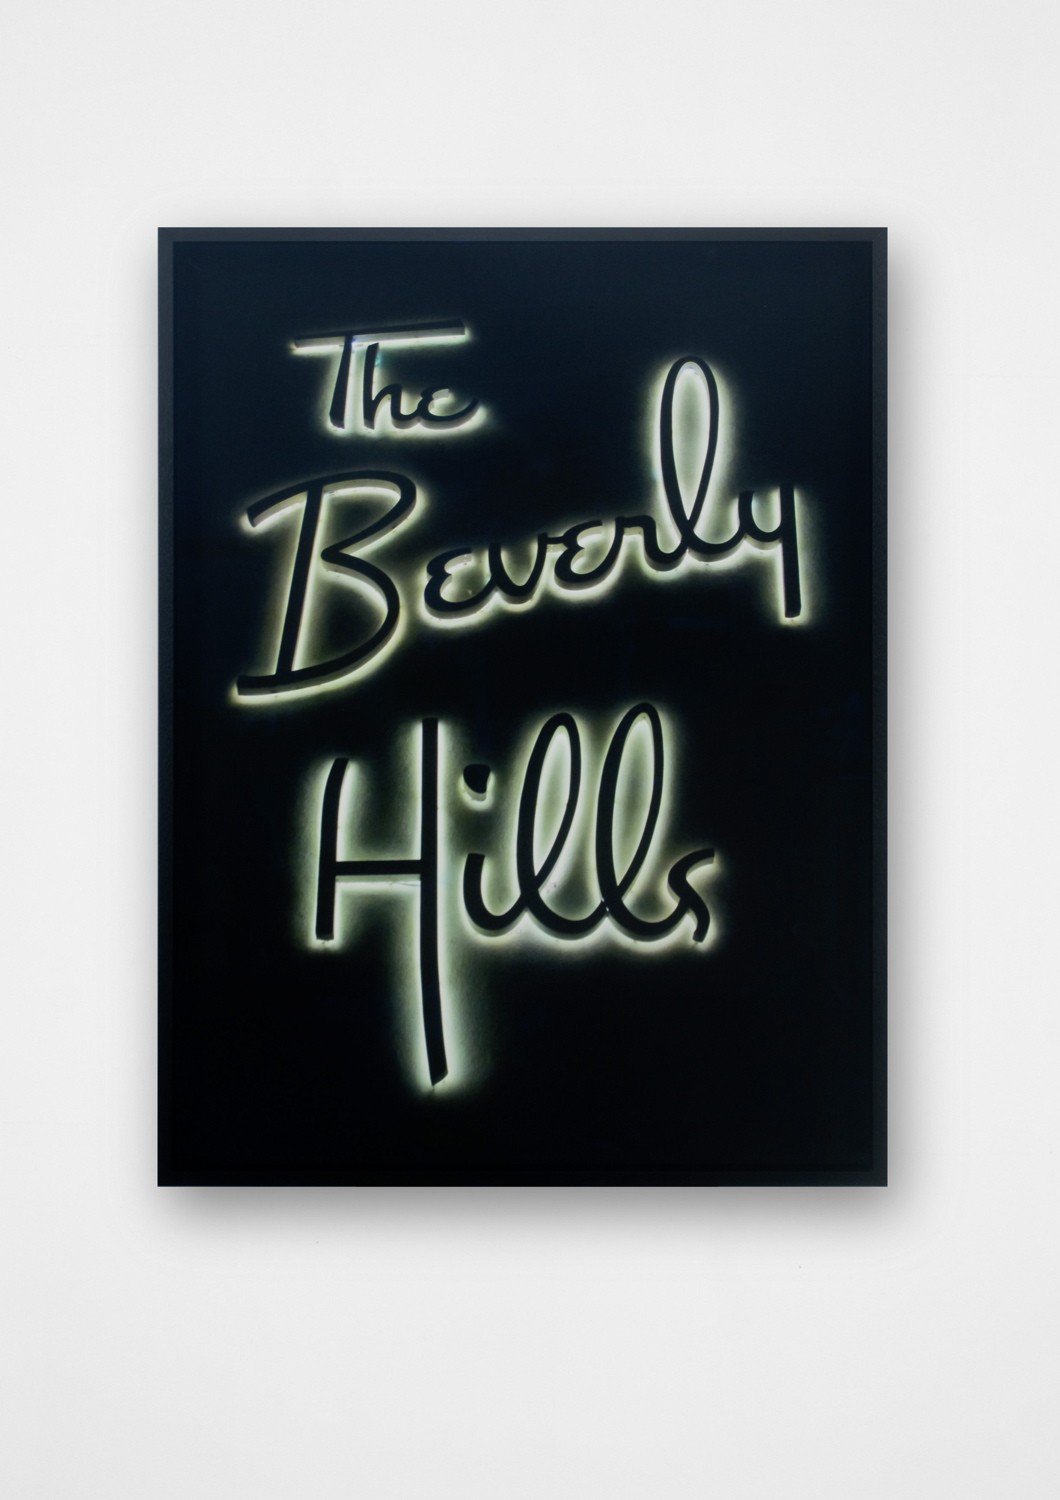 Marius EnghThe Beverly Hills, 2014Inkjet on epson fine art paper, framed93 x 70 cmEdition of 3 plus 1 artist&#x27;s proof